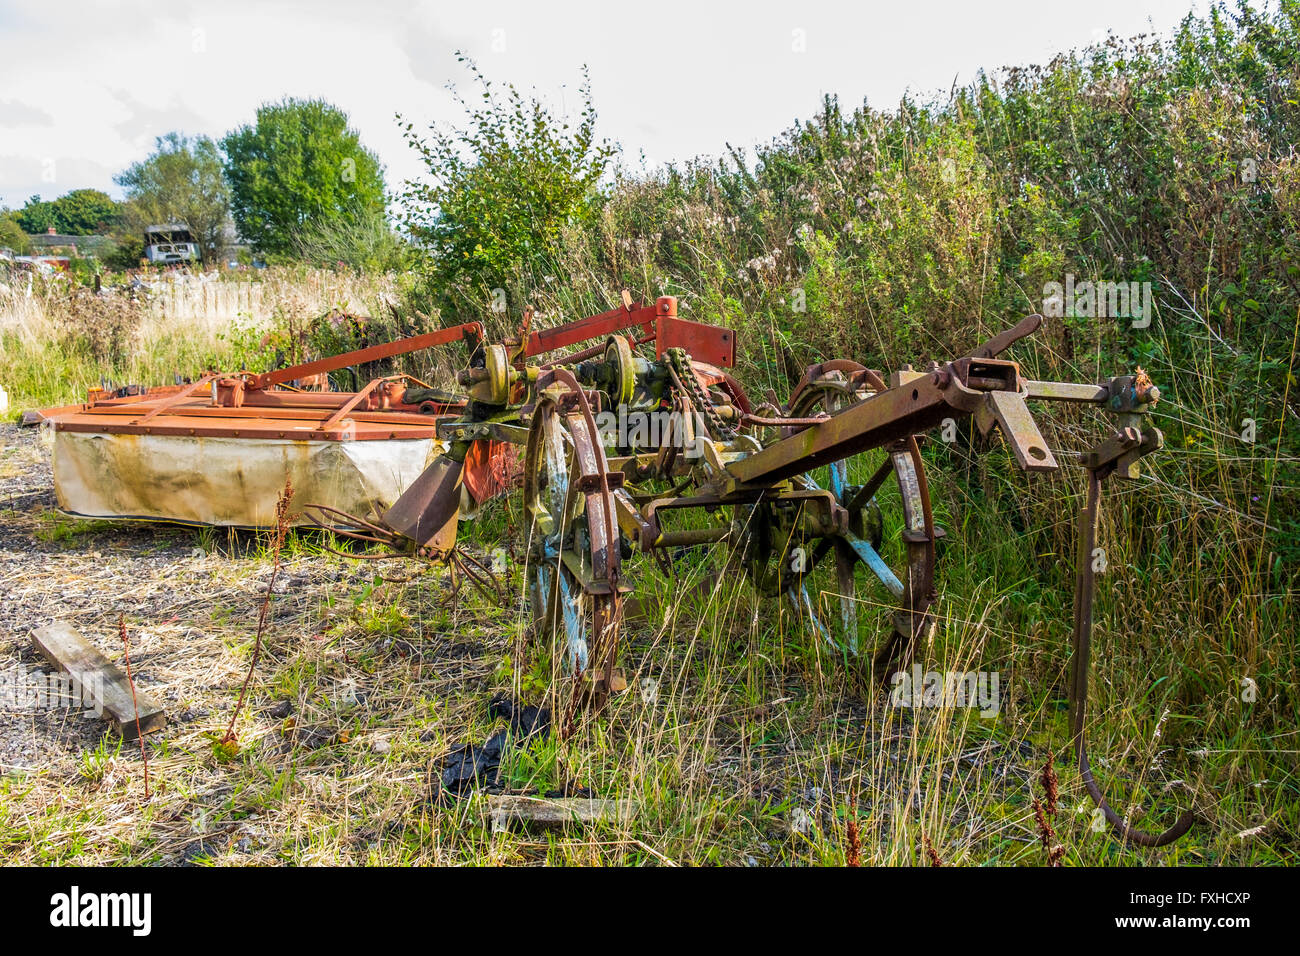 A dilapidated piece of old farmyard machinery left in a field to rust and rot away. Stock Photo